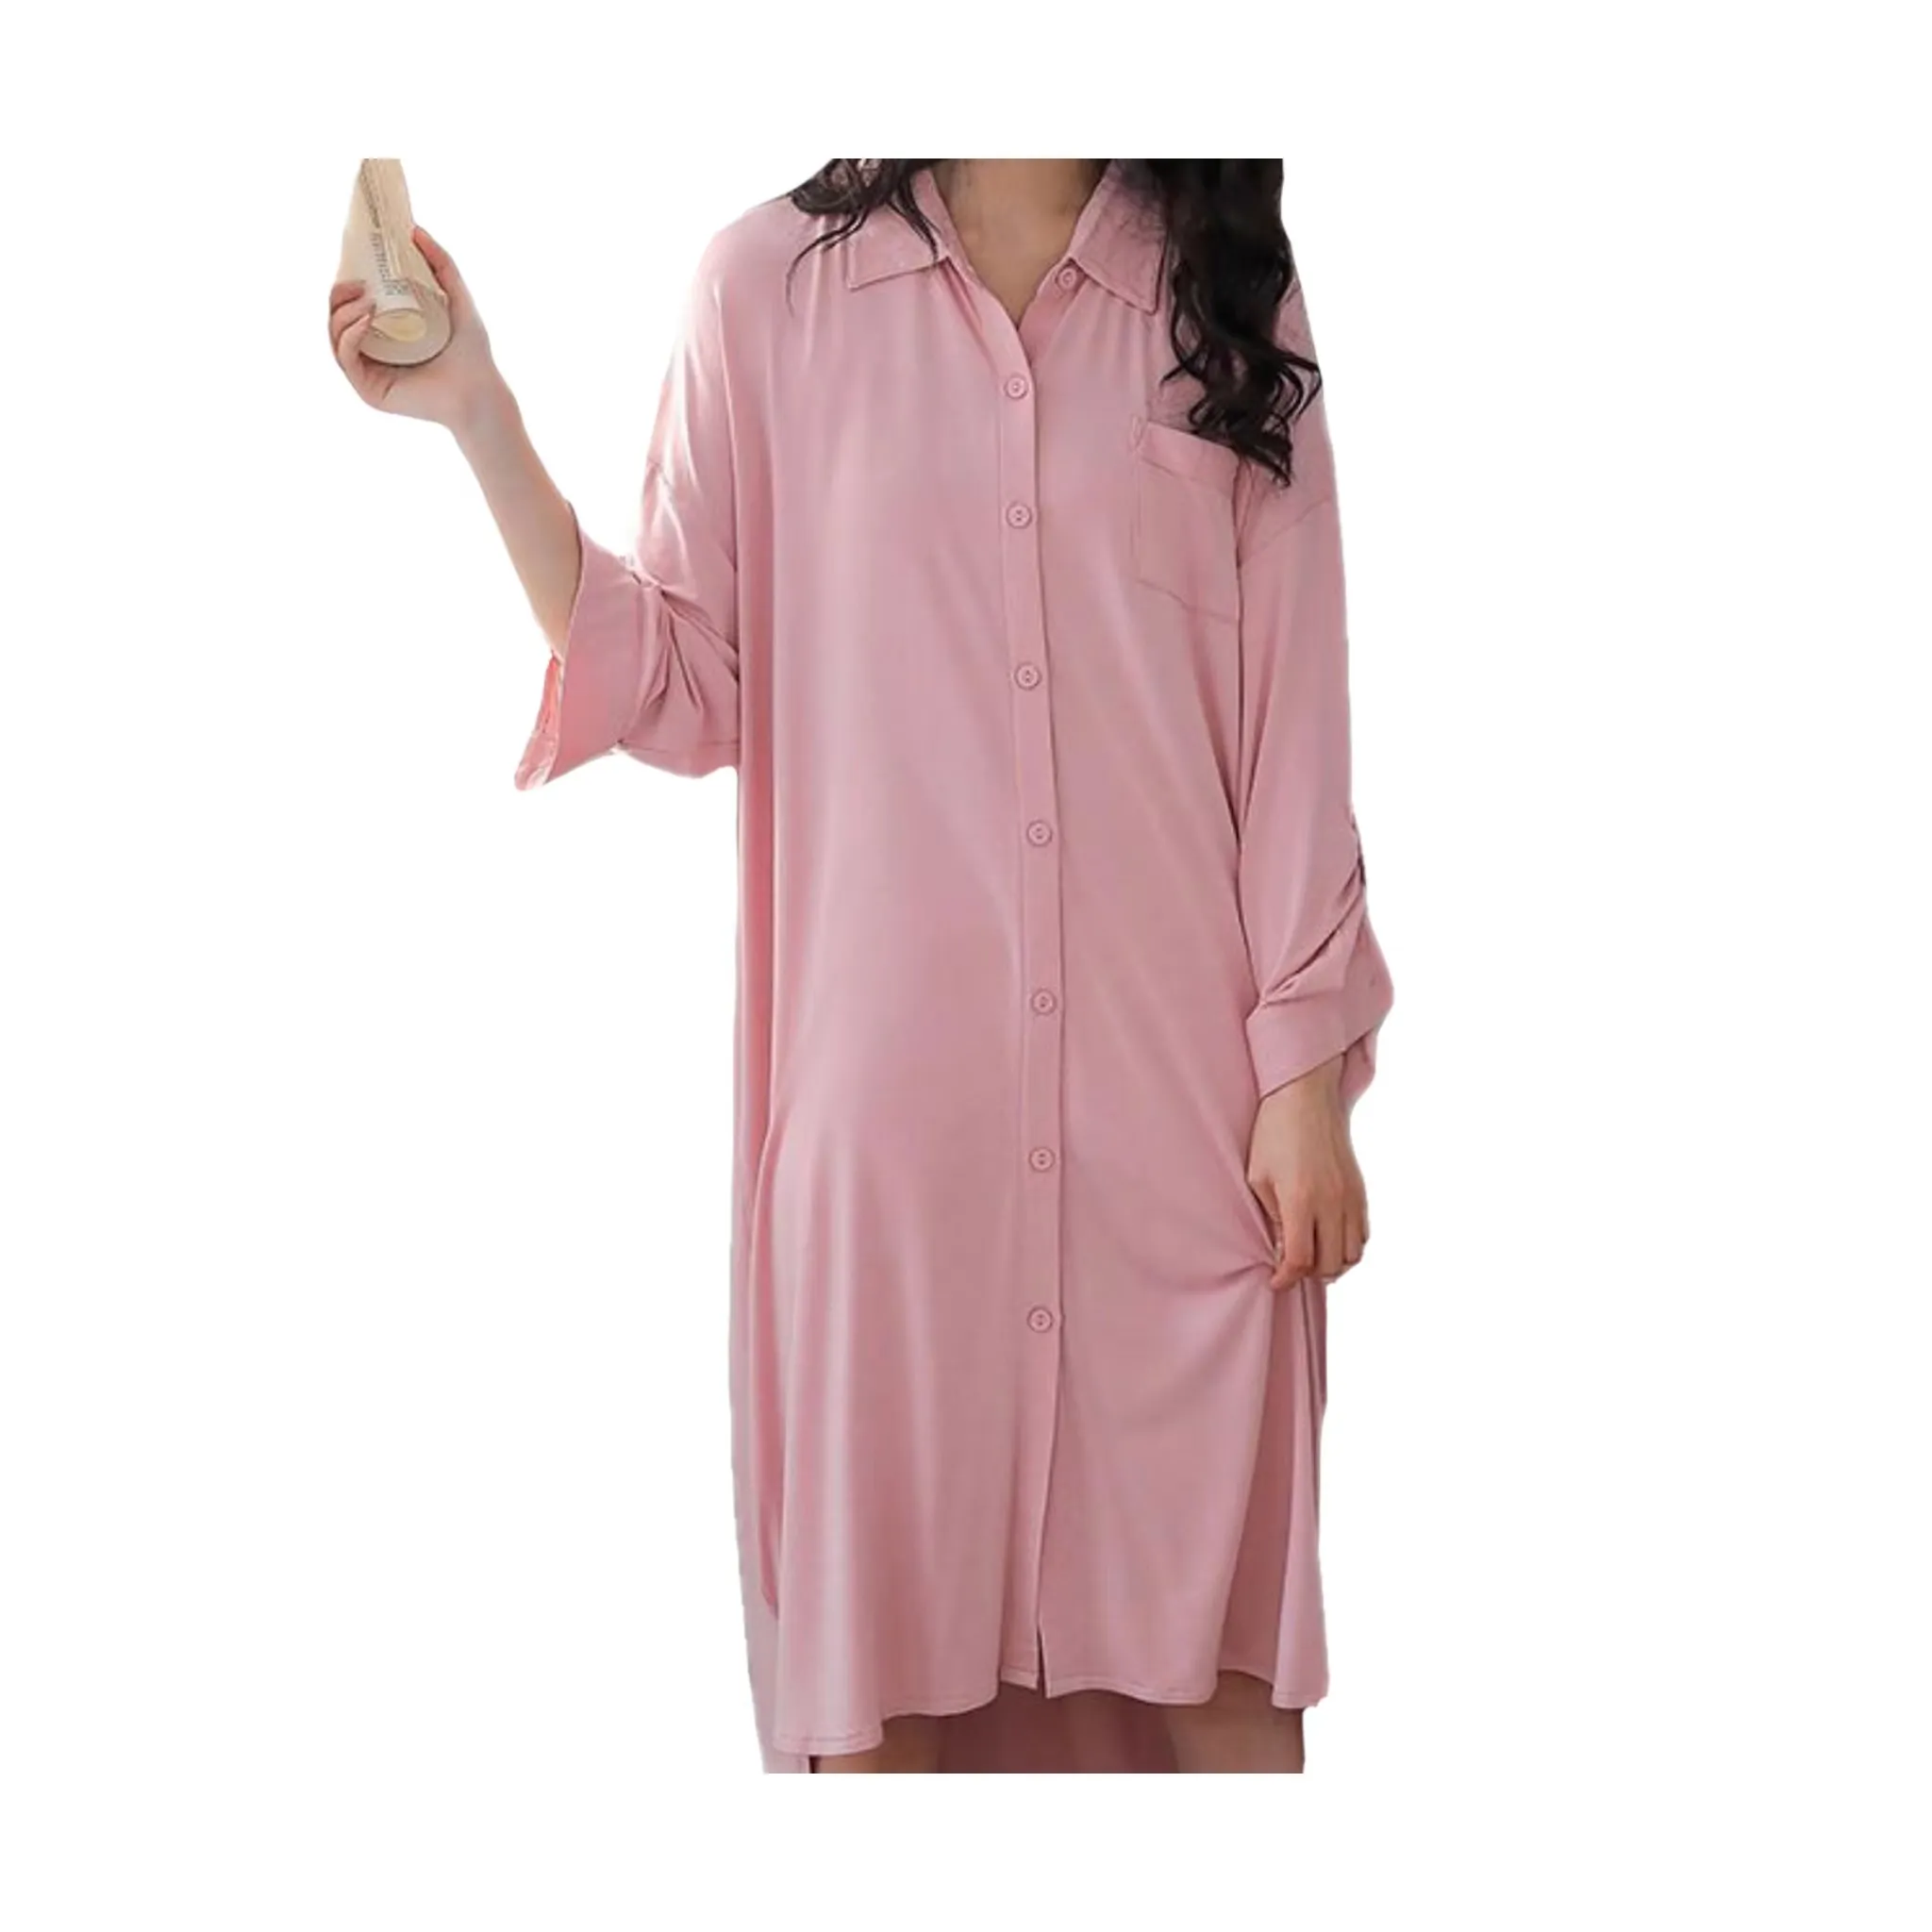 China Manufacturer Factory Price Living Leisure pure color button ladies sleepwear